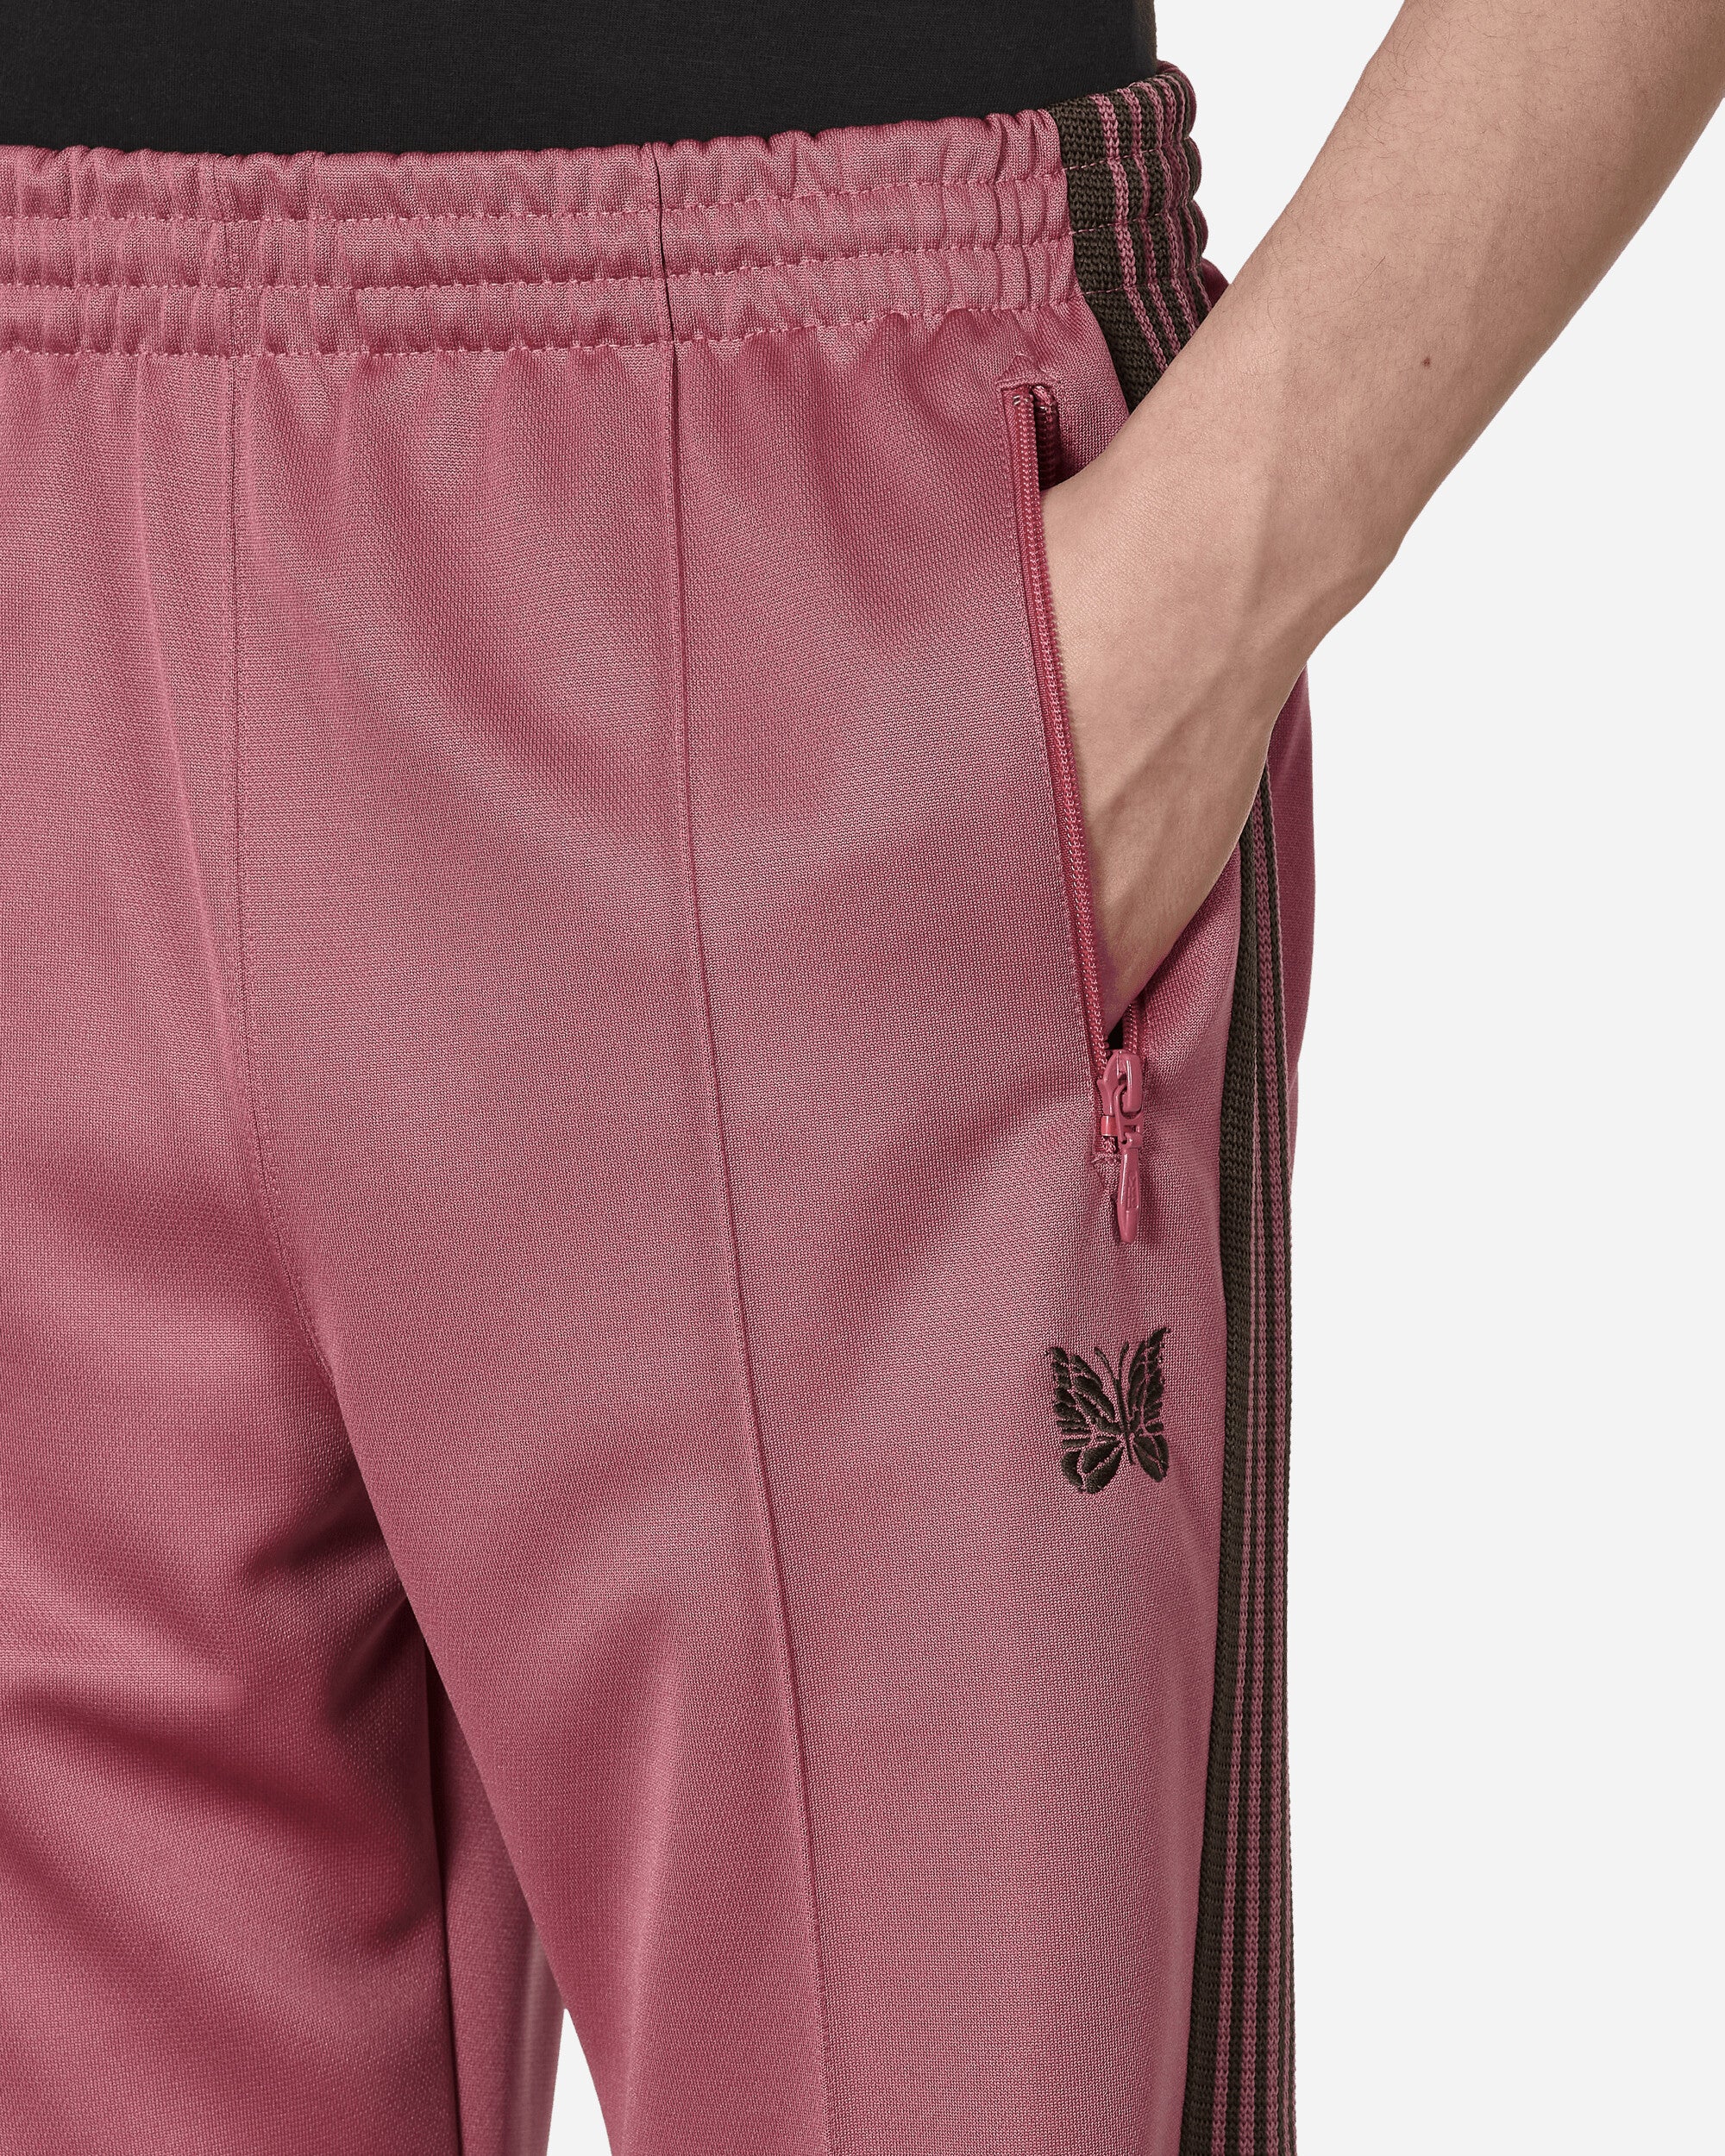 Needles Poly Smooth Track Pants Smoke Pink - Slam Jam Official Store